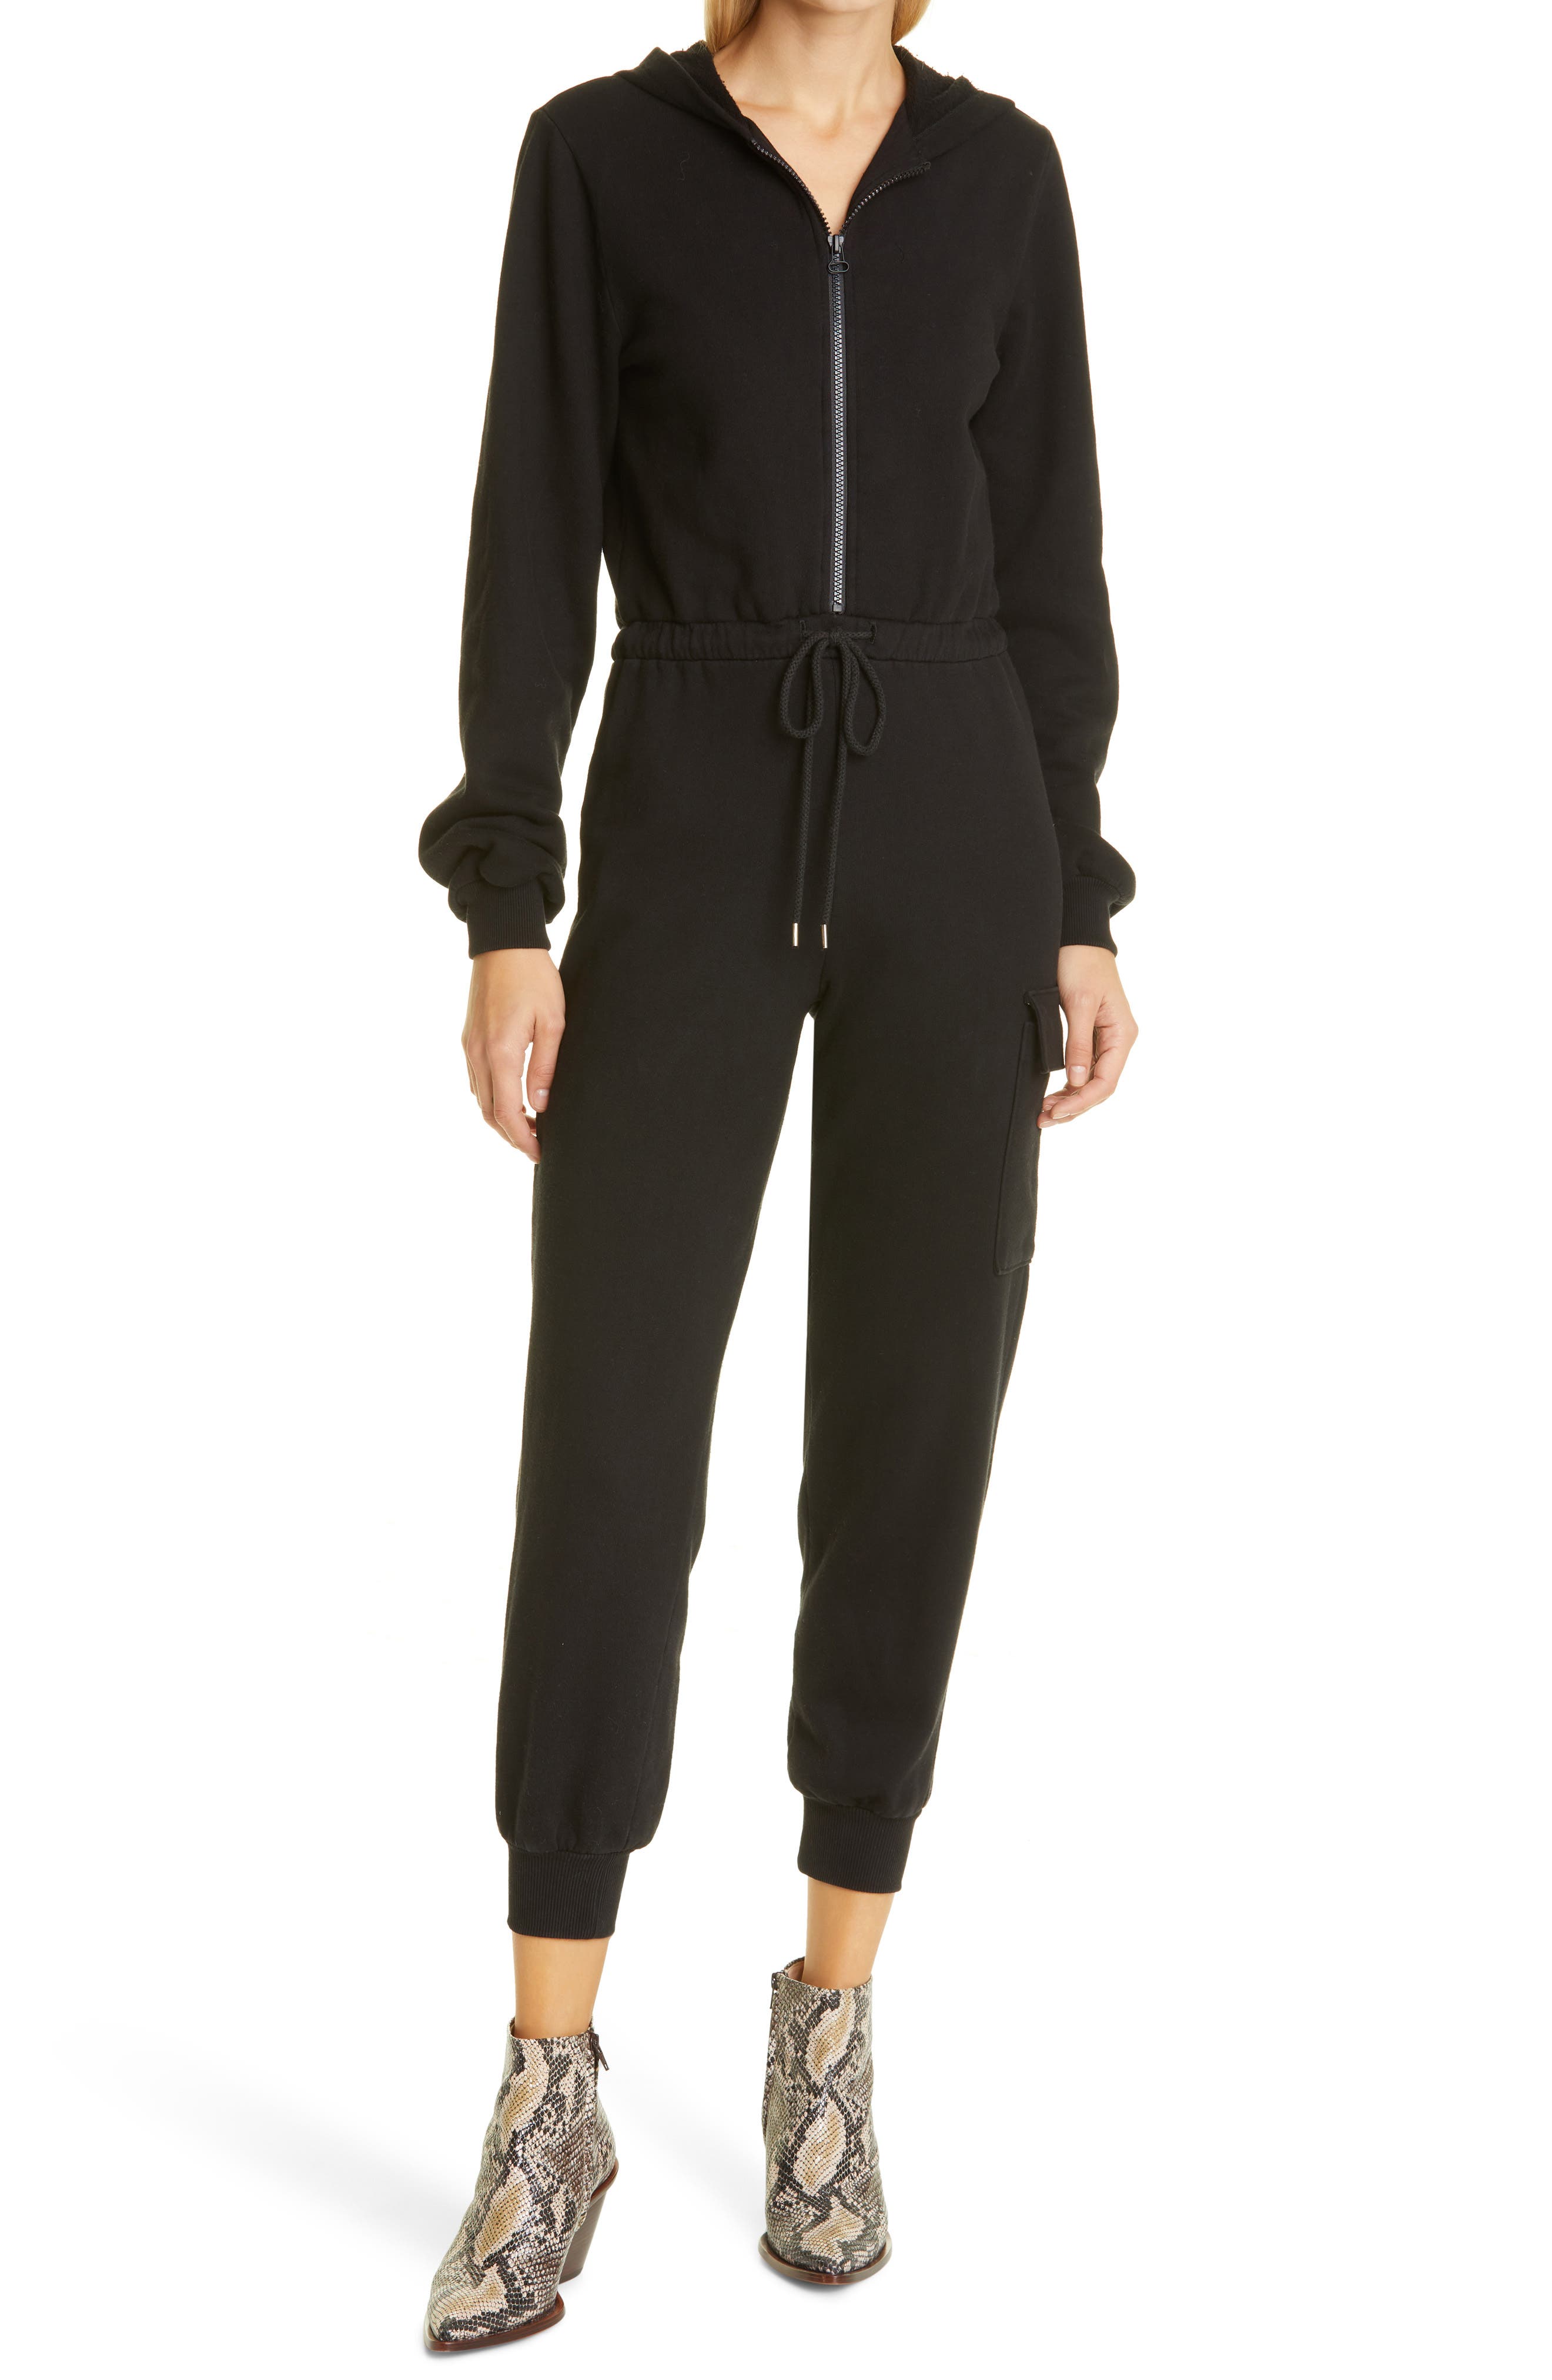 The Range French Terry Hooded Jumpsuit in Jet Black at Nordstrom